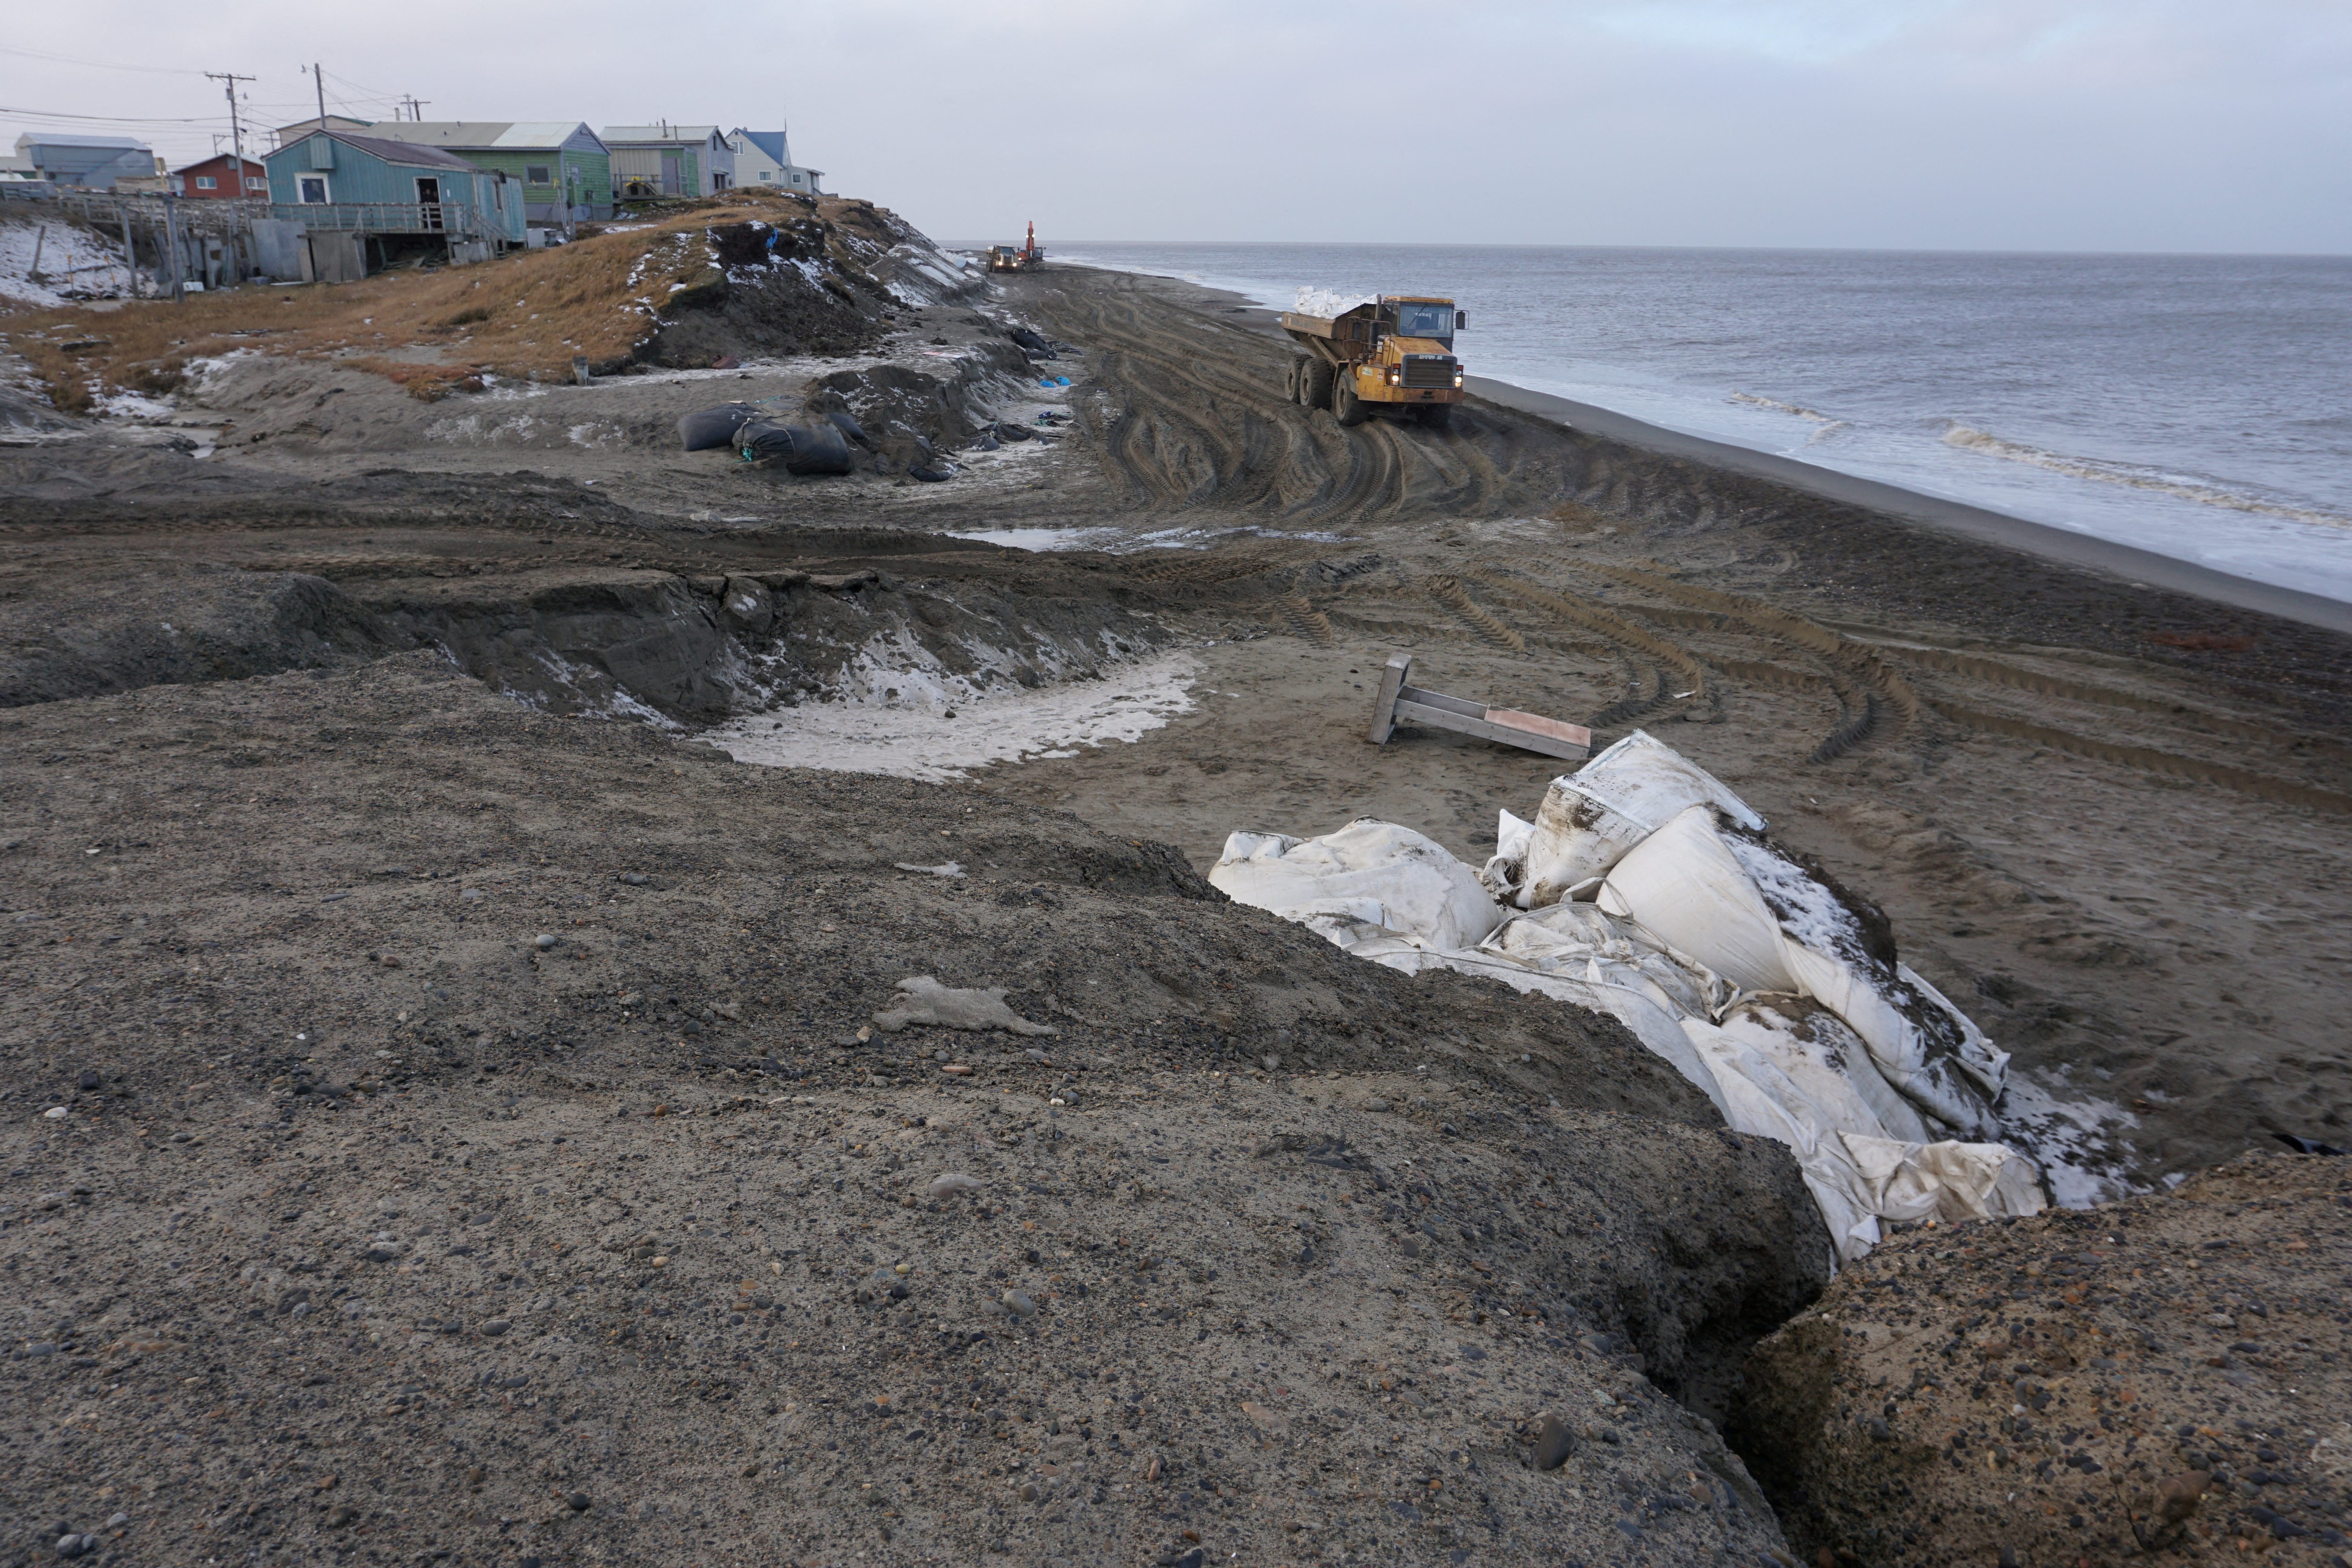 North Slope Borough of Utqiagvik, Alaska, tries to protect against coastal erosion from flooding from an increasingly ice-free Beaufort Sea